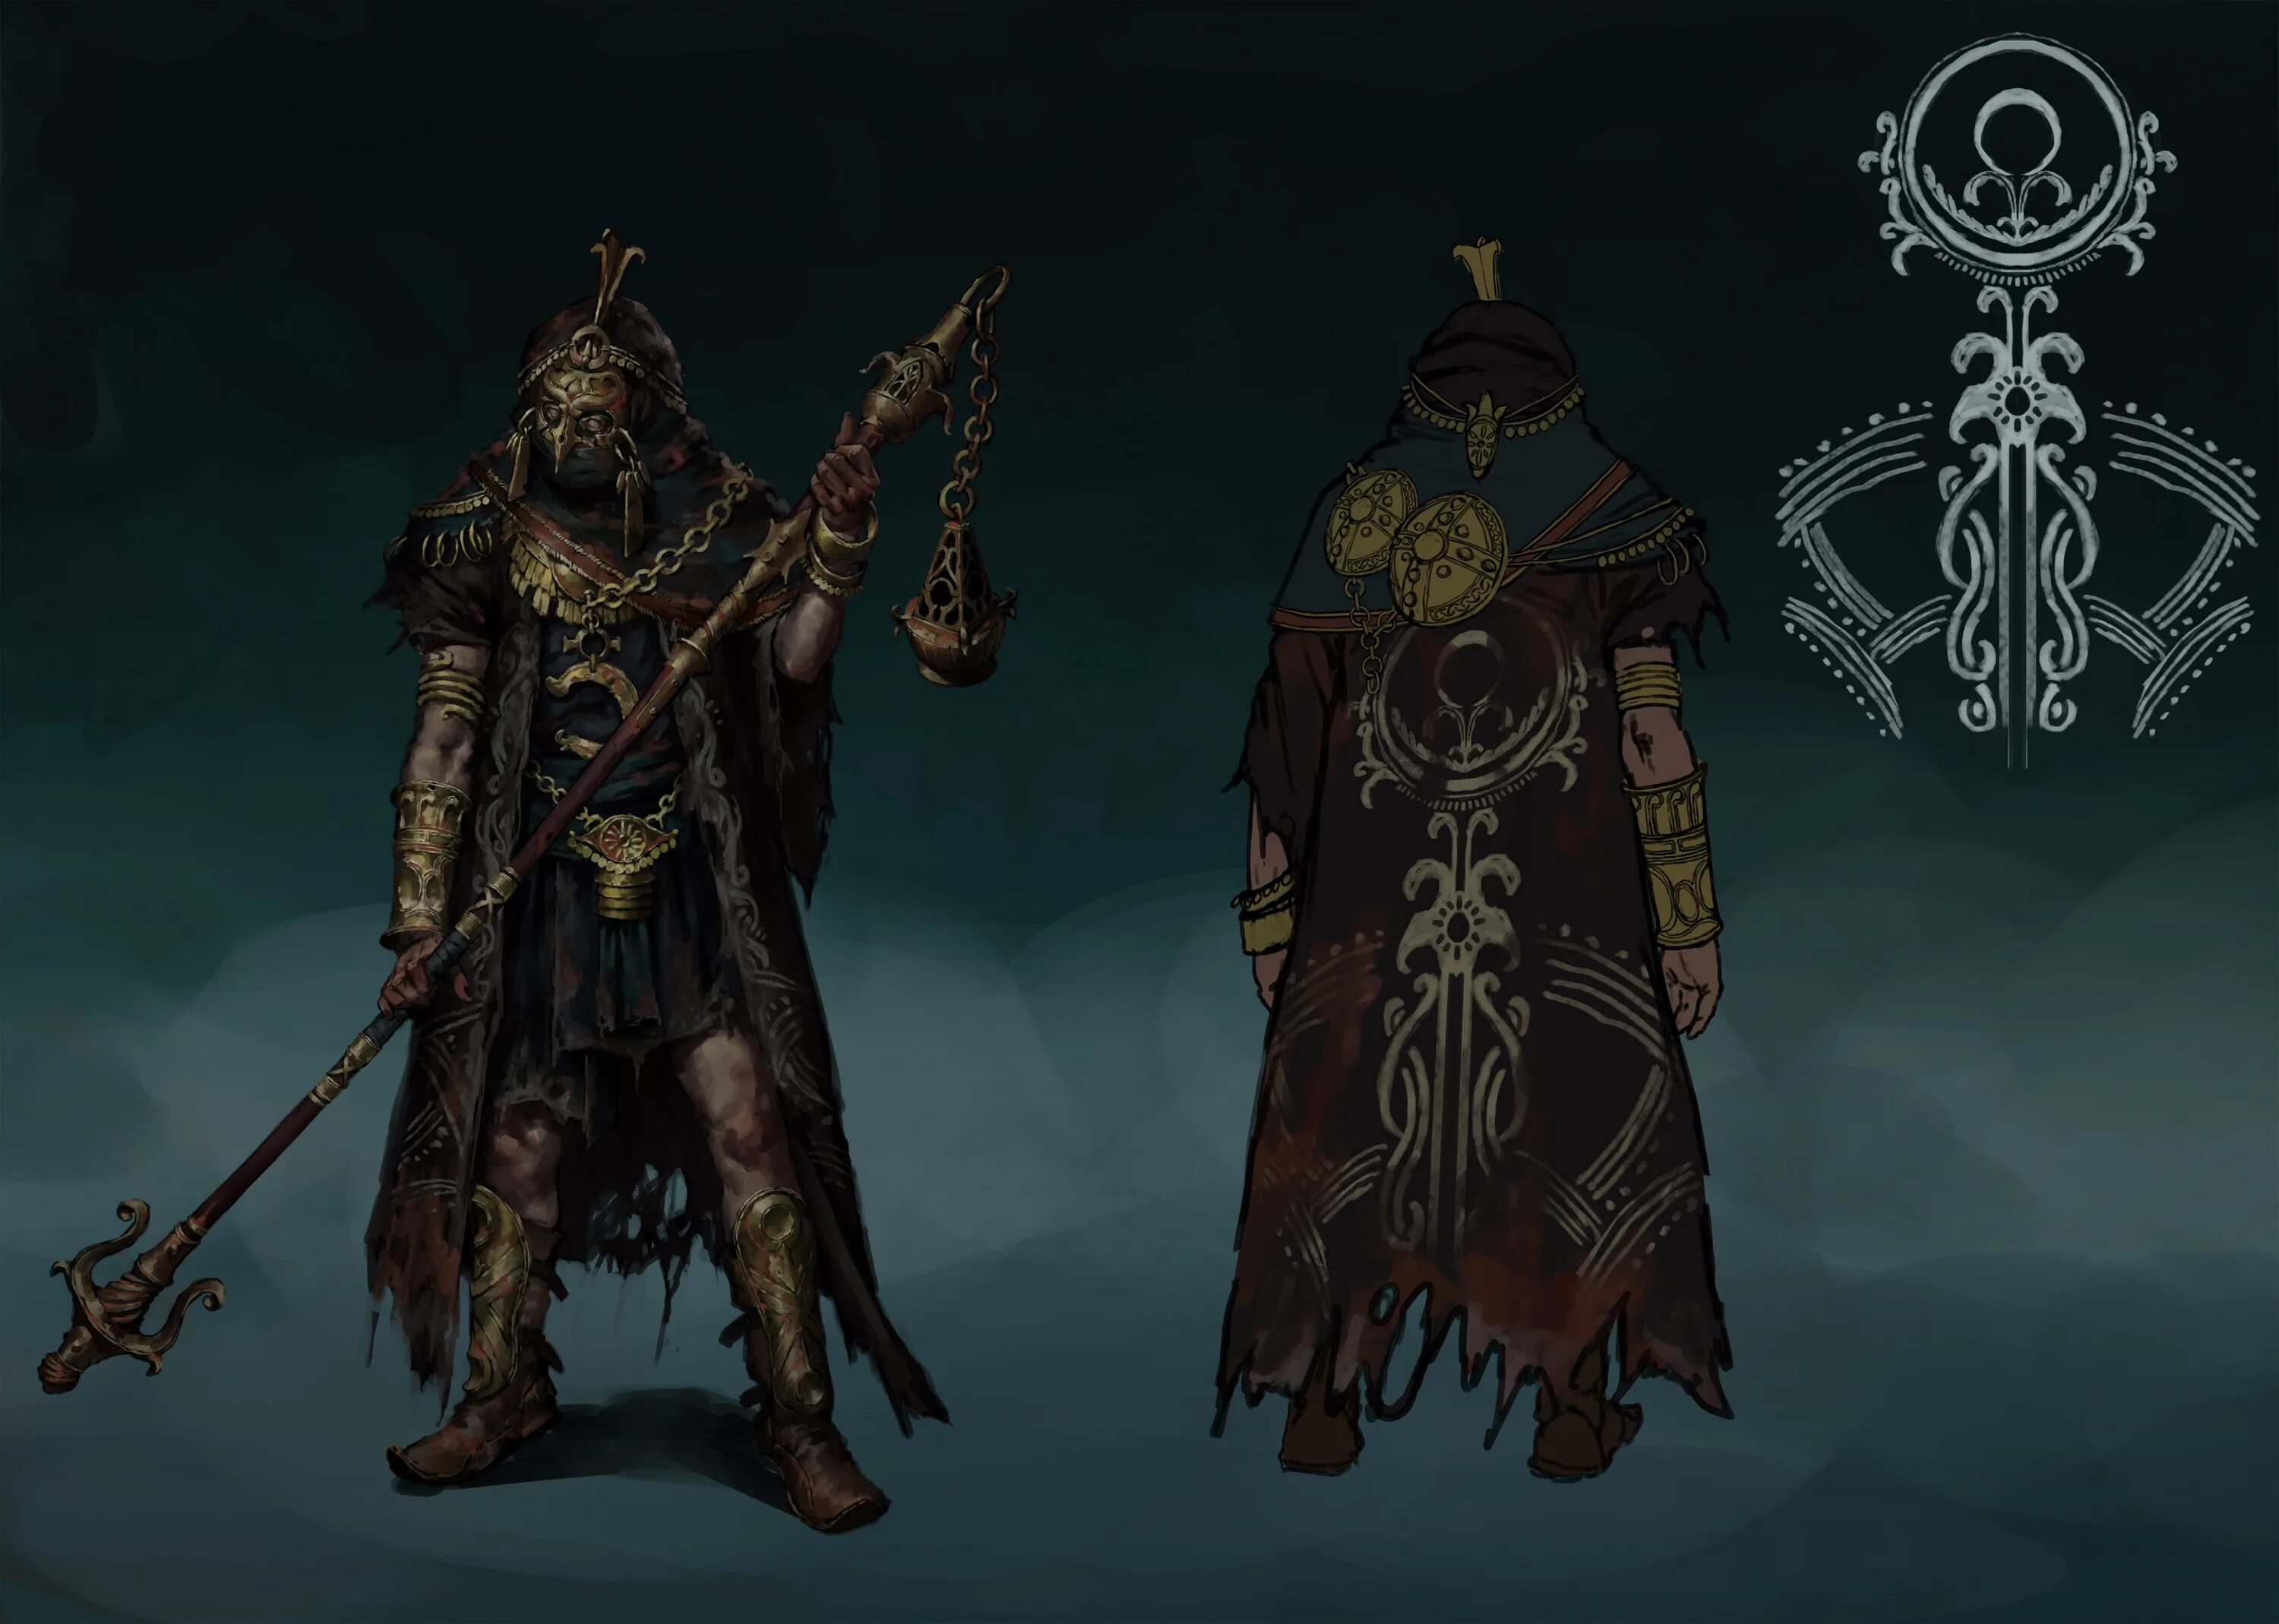 Occultist poe. Path of Exile 2. Path of Exile 2 Concept Art. Path of Exile концепт арт. POE Occultist.